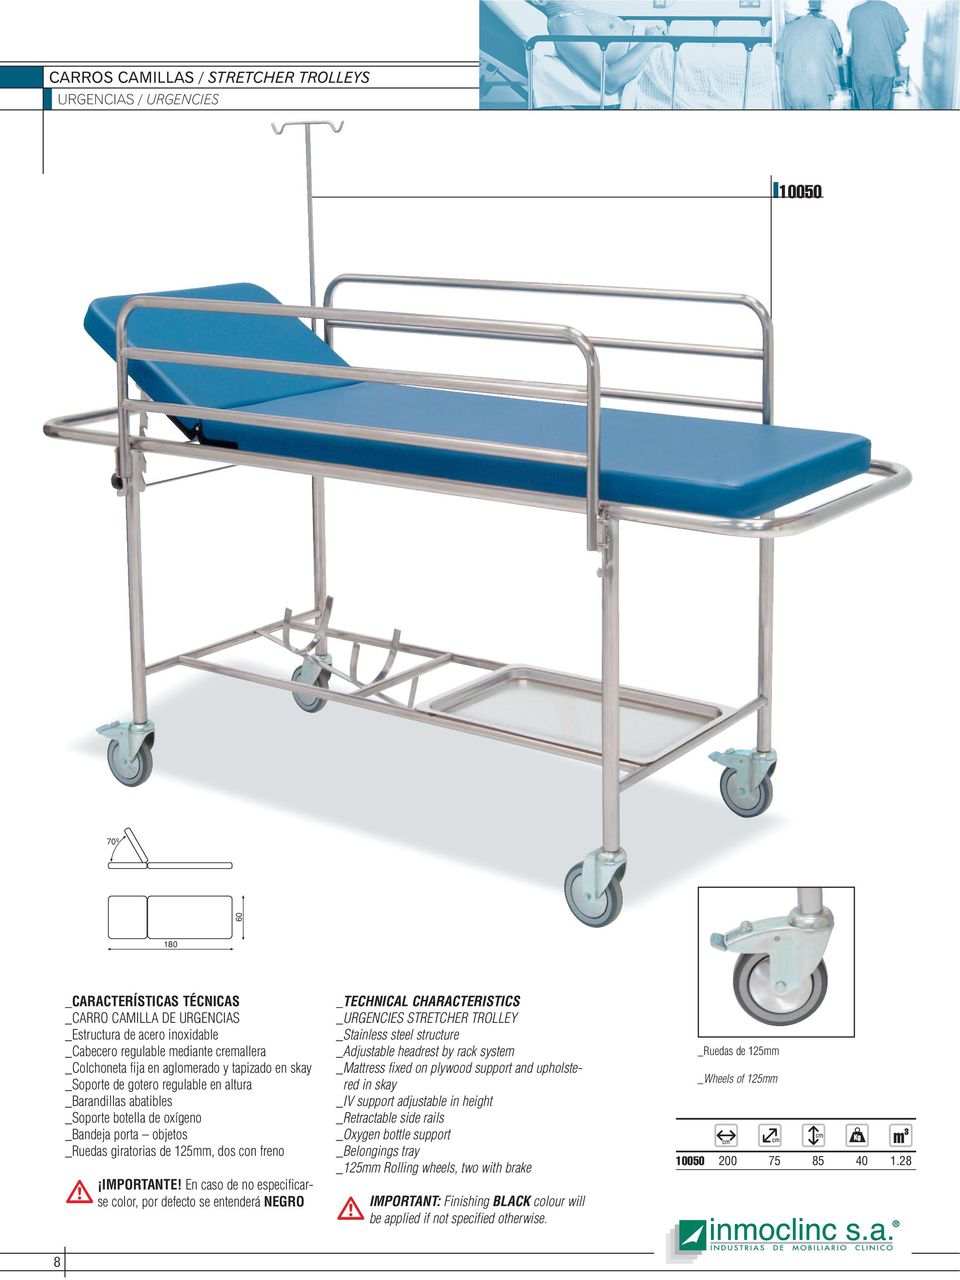 En caso de no especificarse color, por defecto se entenderá NEGRO _TECHNICAL CHARACTERISTICS _URGENCIES STRETCHER TROLLEY _Stainless steel structure _Mattress fixed on plywood support and